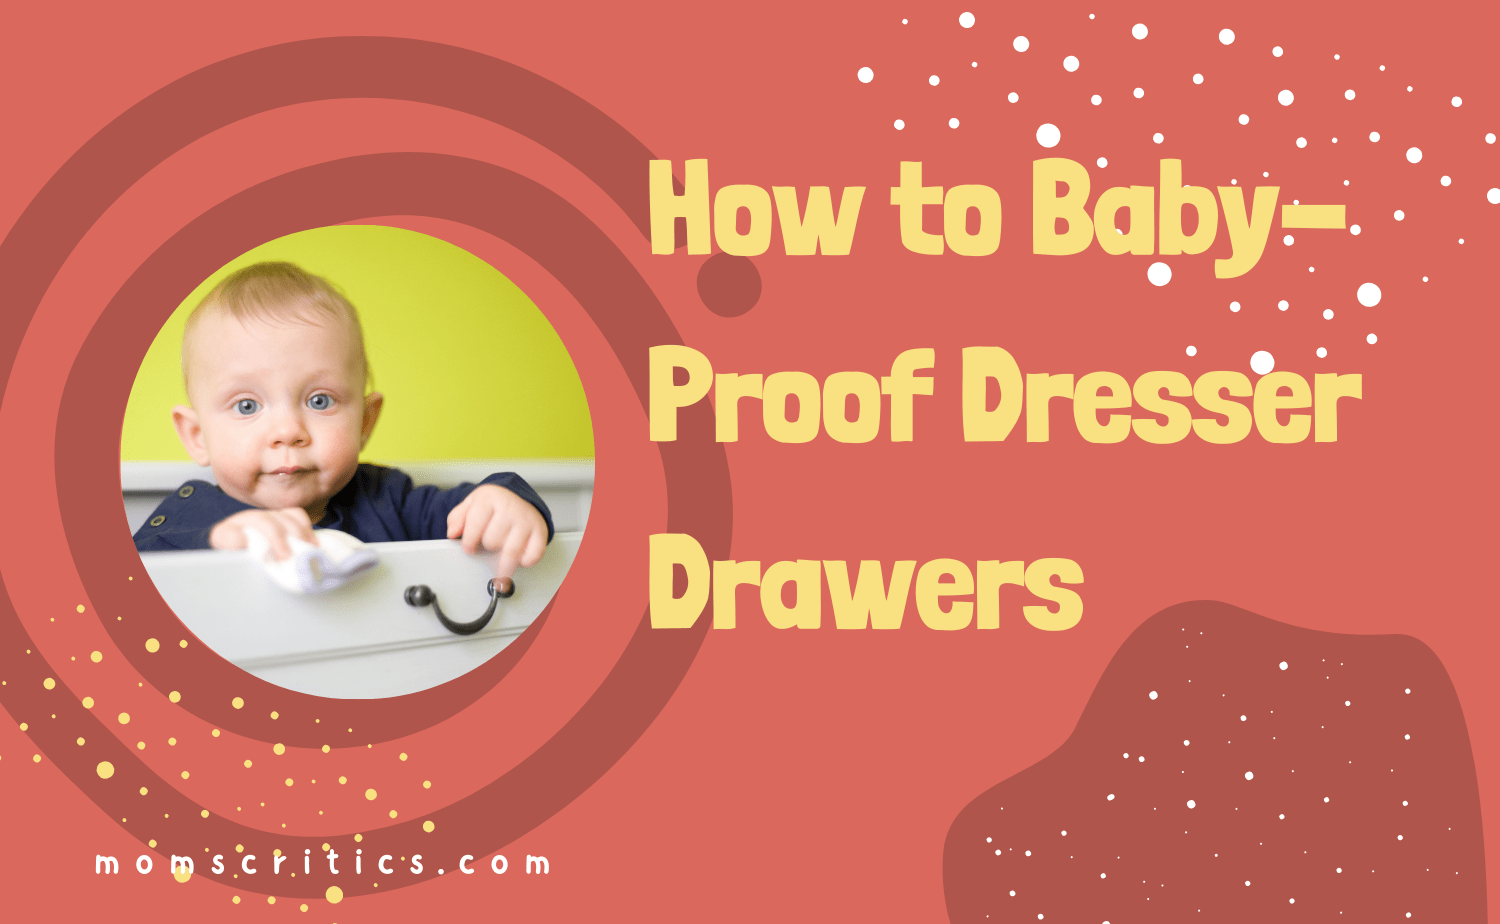 how to baby proof dresser drawers